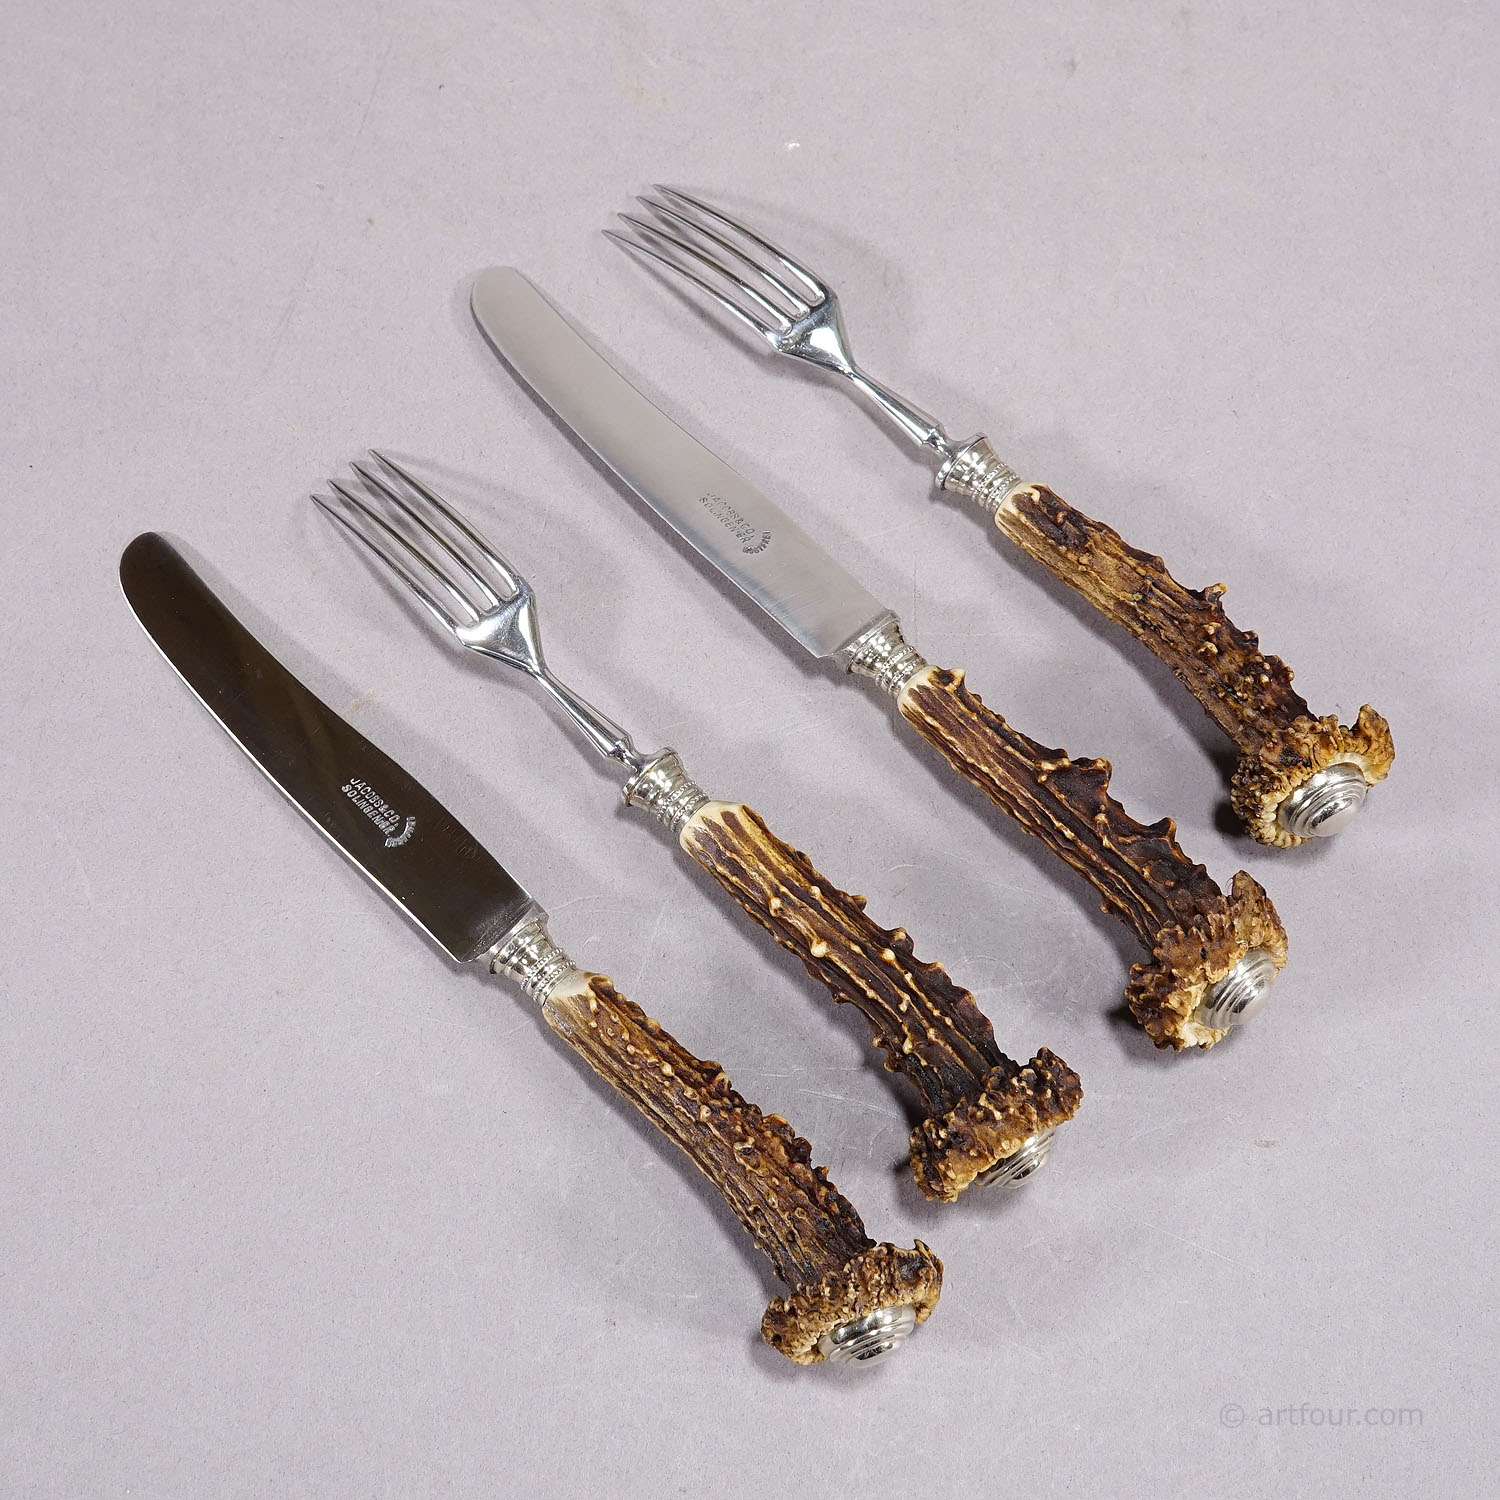 Vintage Stainless Steel and Horn 4 Pieces Tableware Set, Germany 1930s